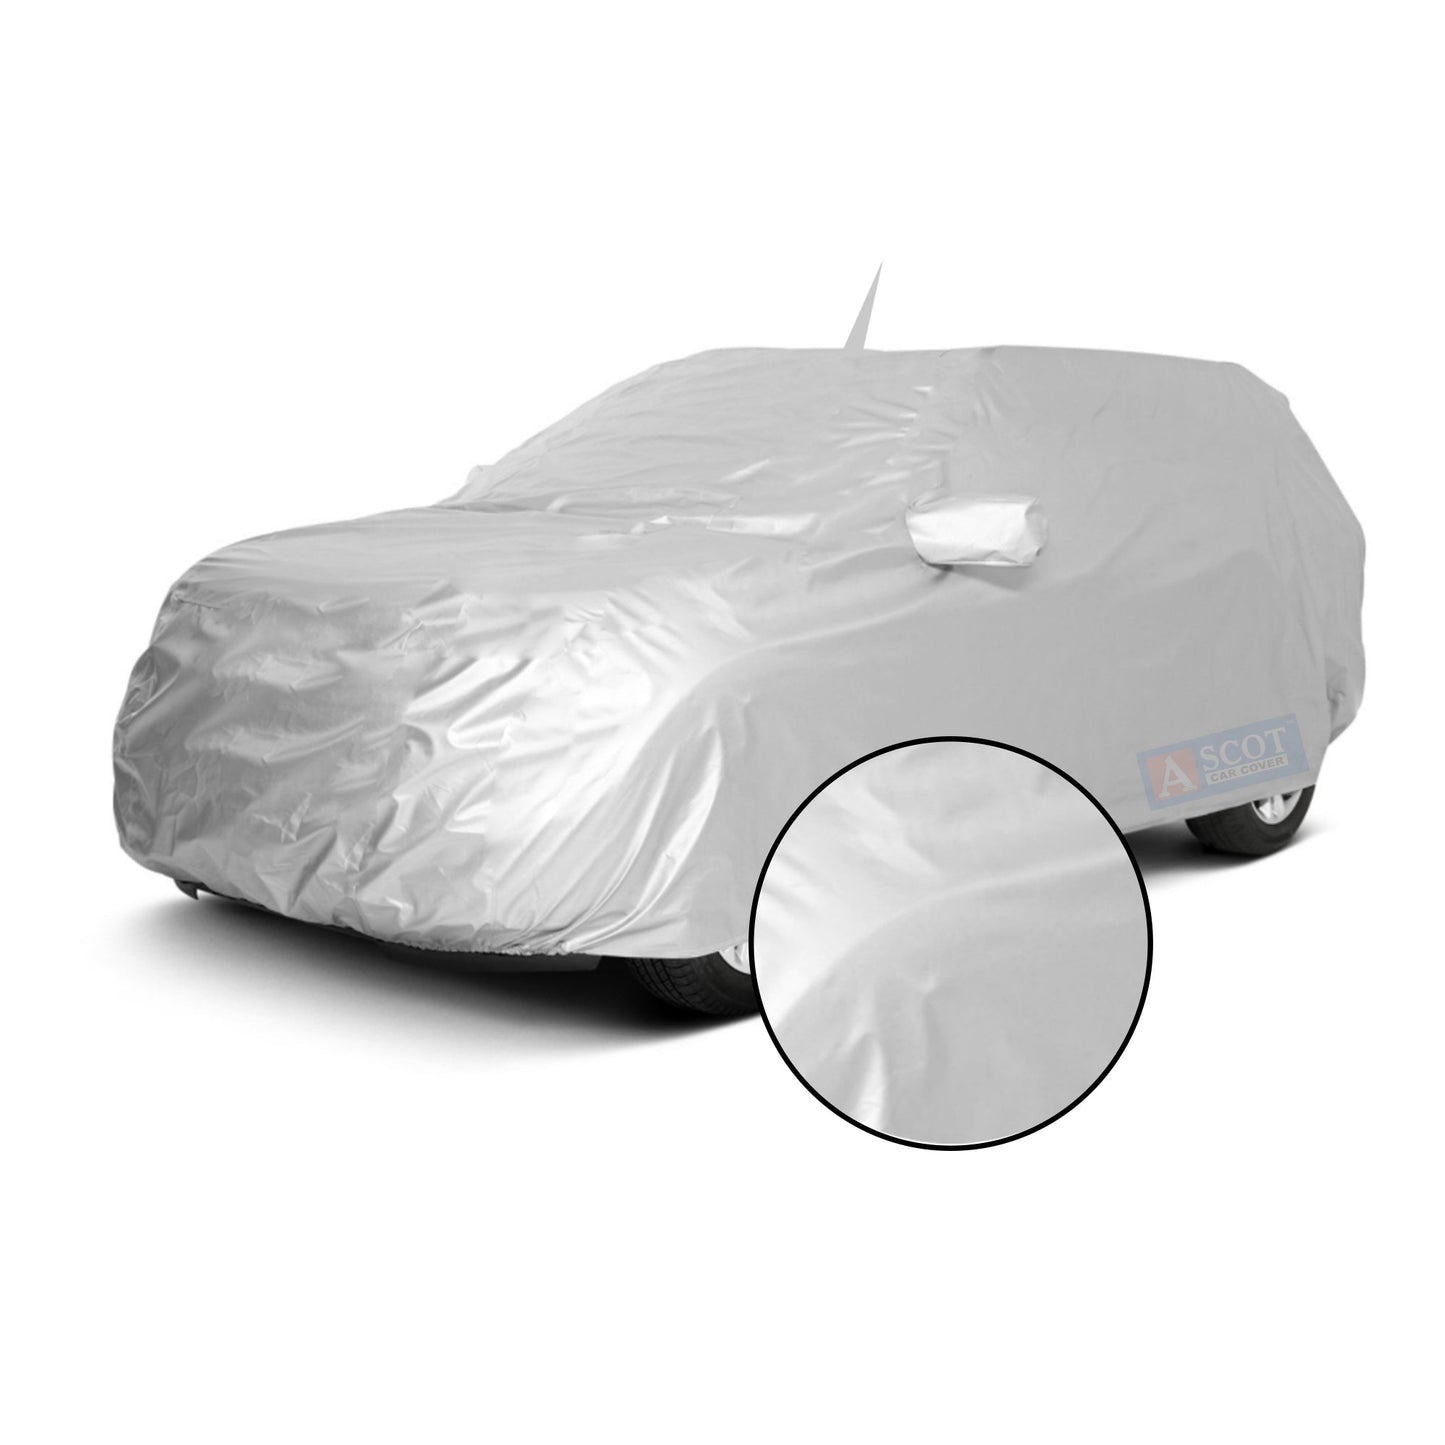 Ascot BMW X5 2007-2014 Model Car Body Cover Dust Proof, Trippel Stitched